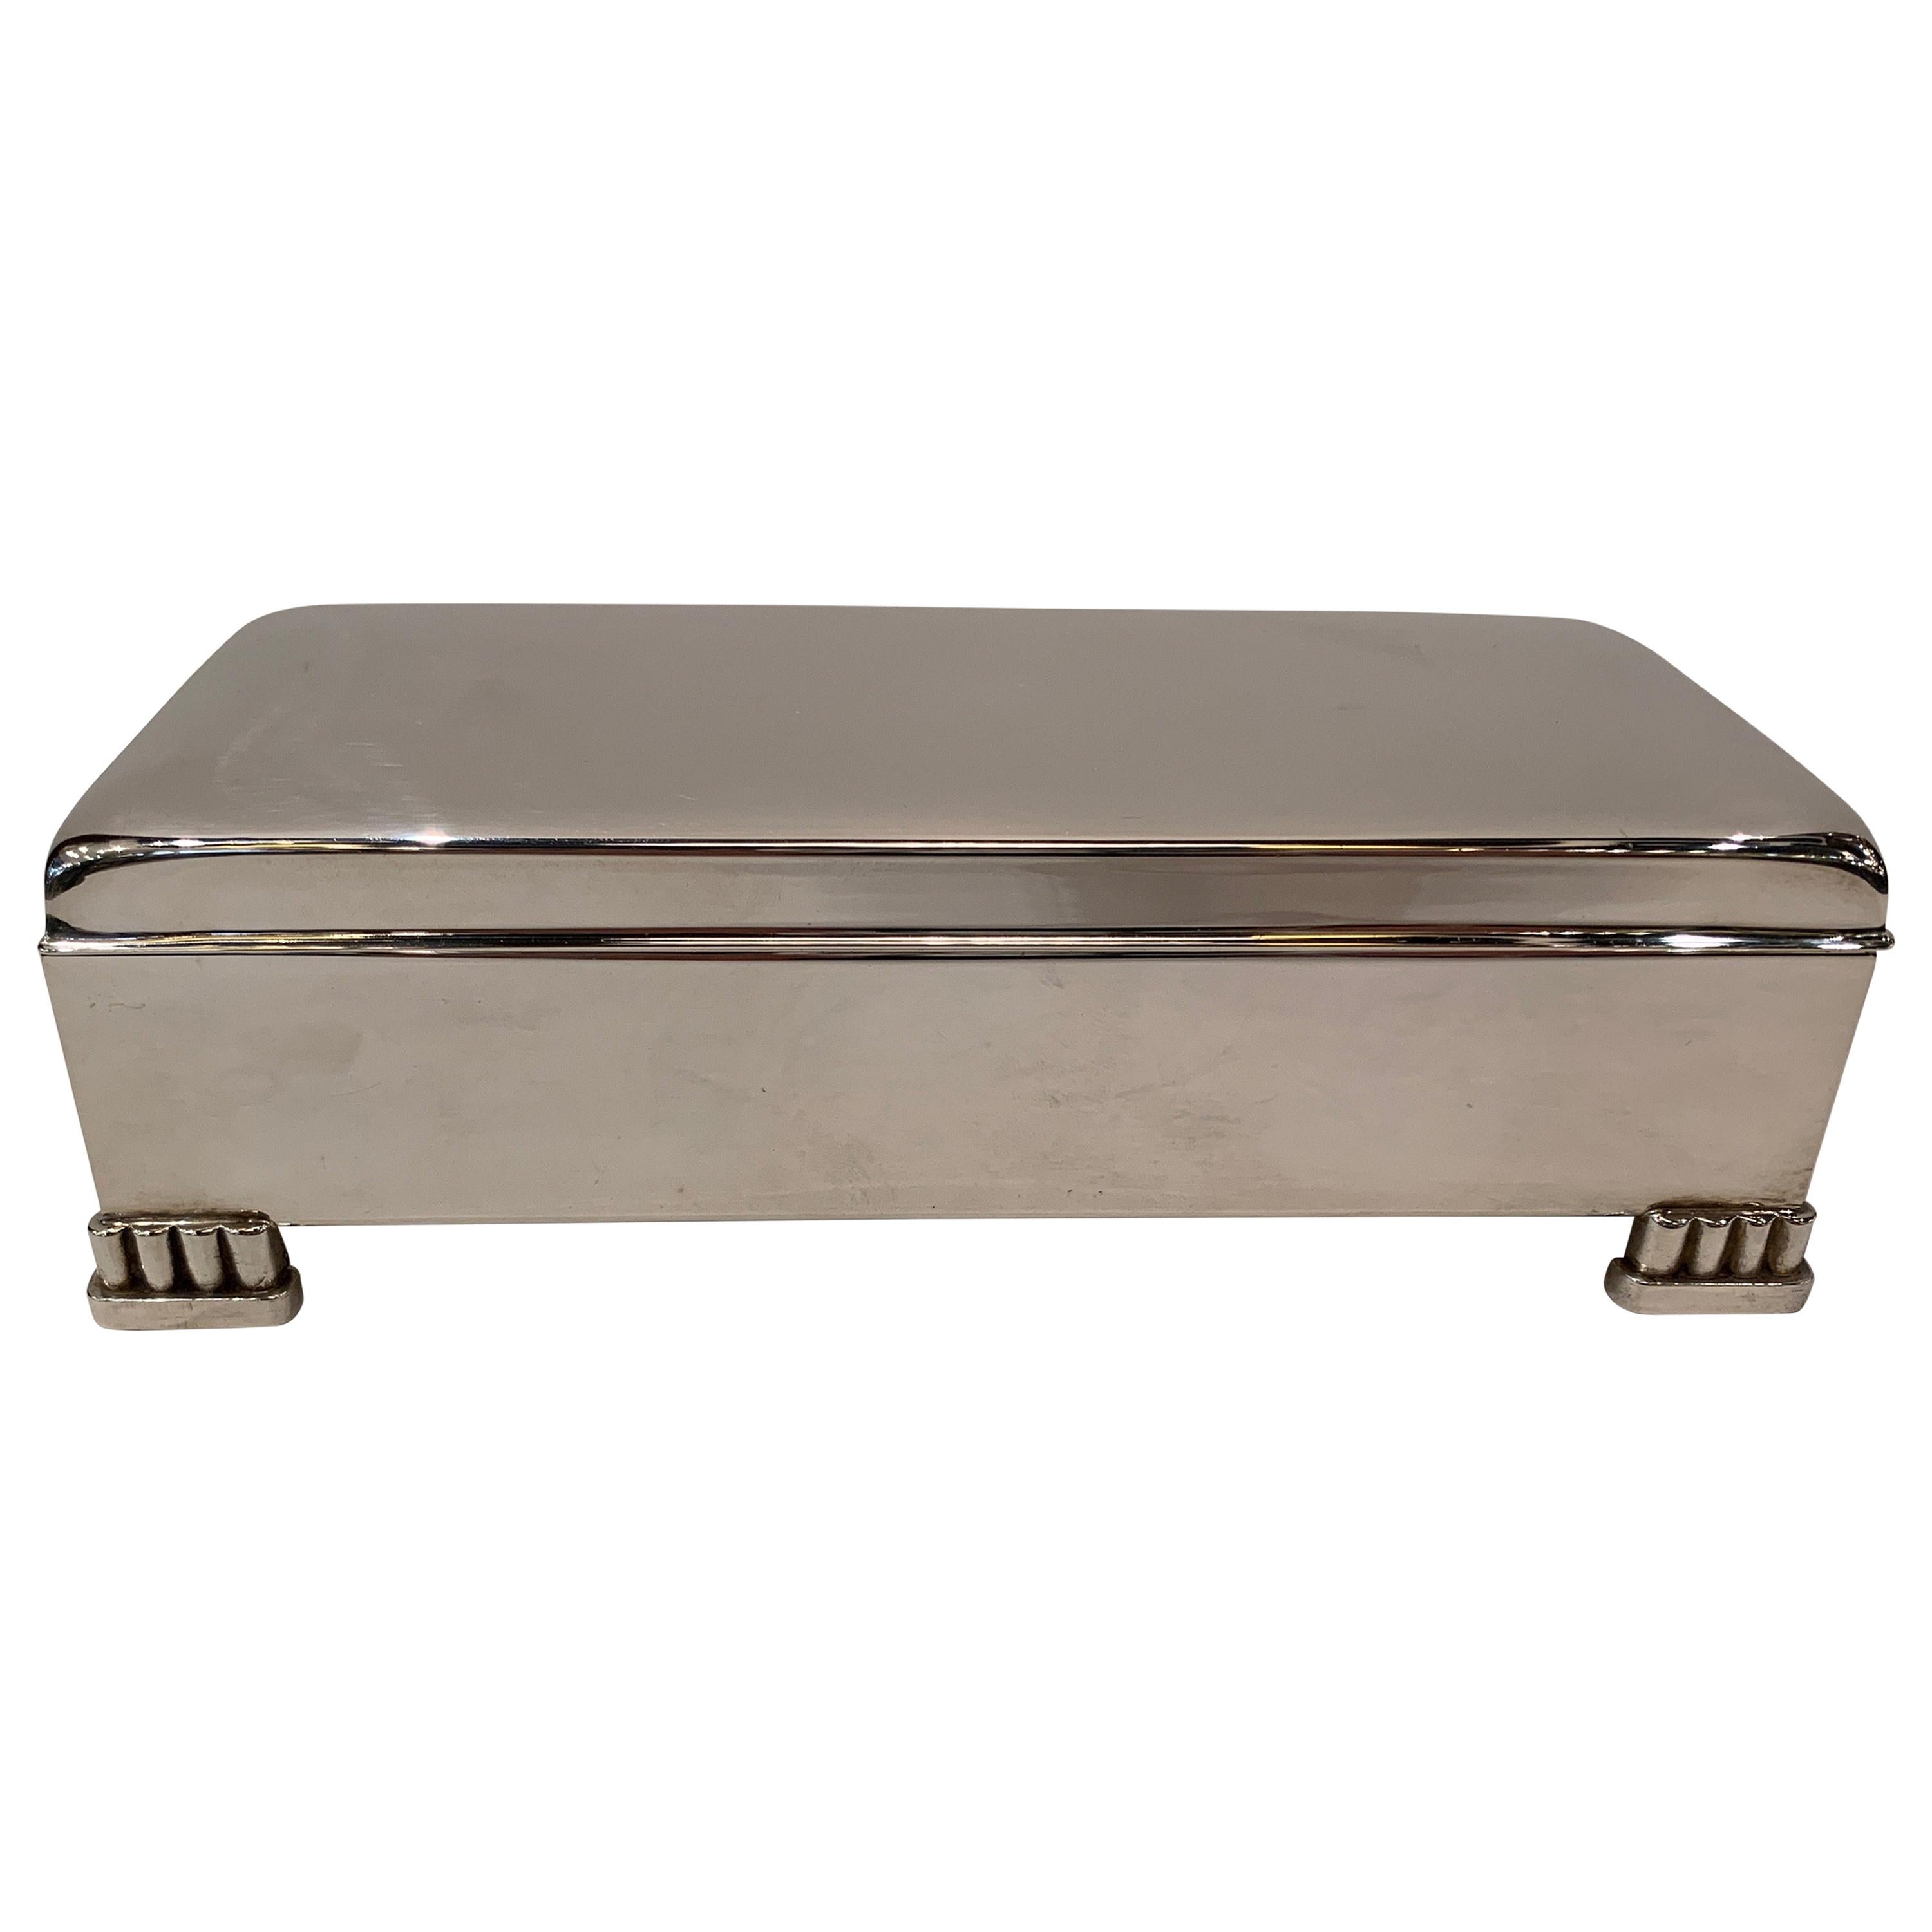 Early 20th Century Sterling Silver Dresser-Desk Box by Poole Silver Co